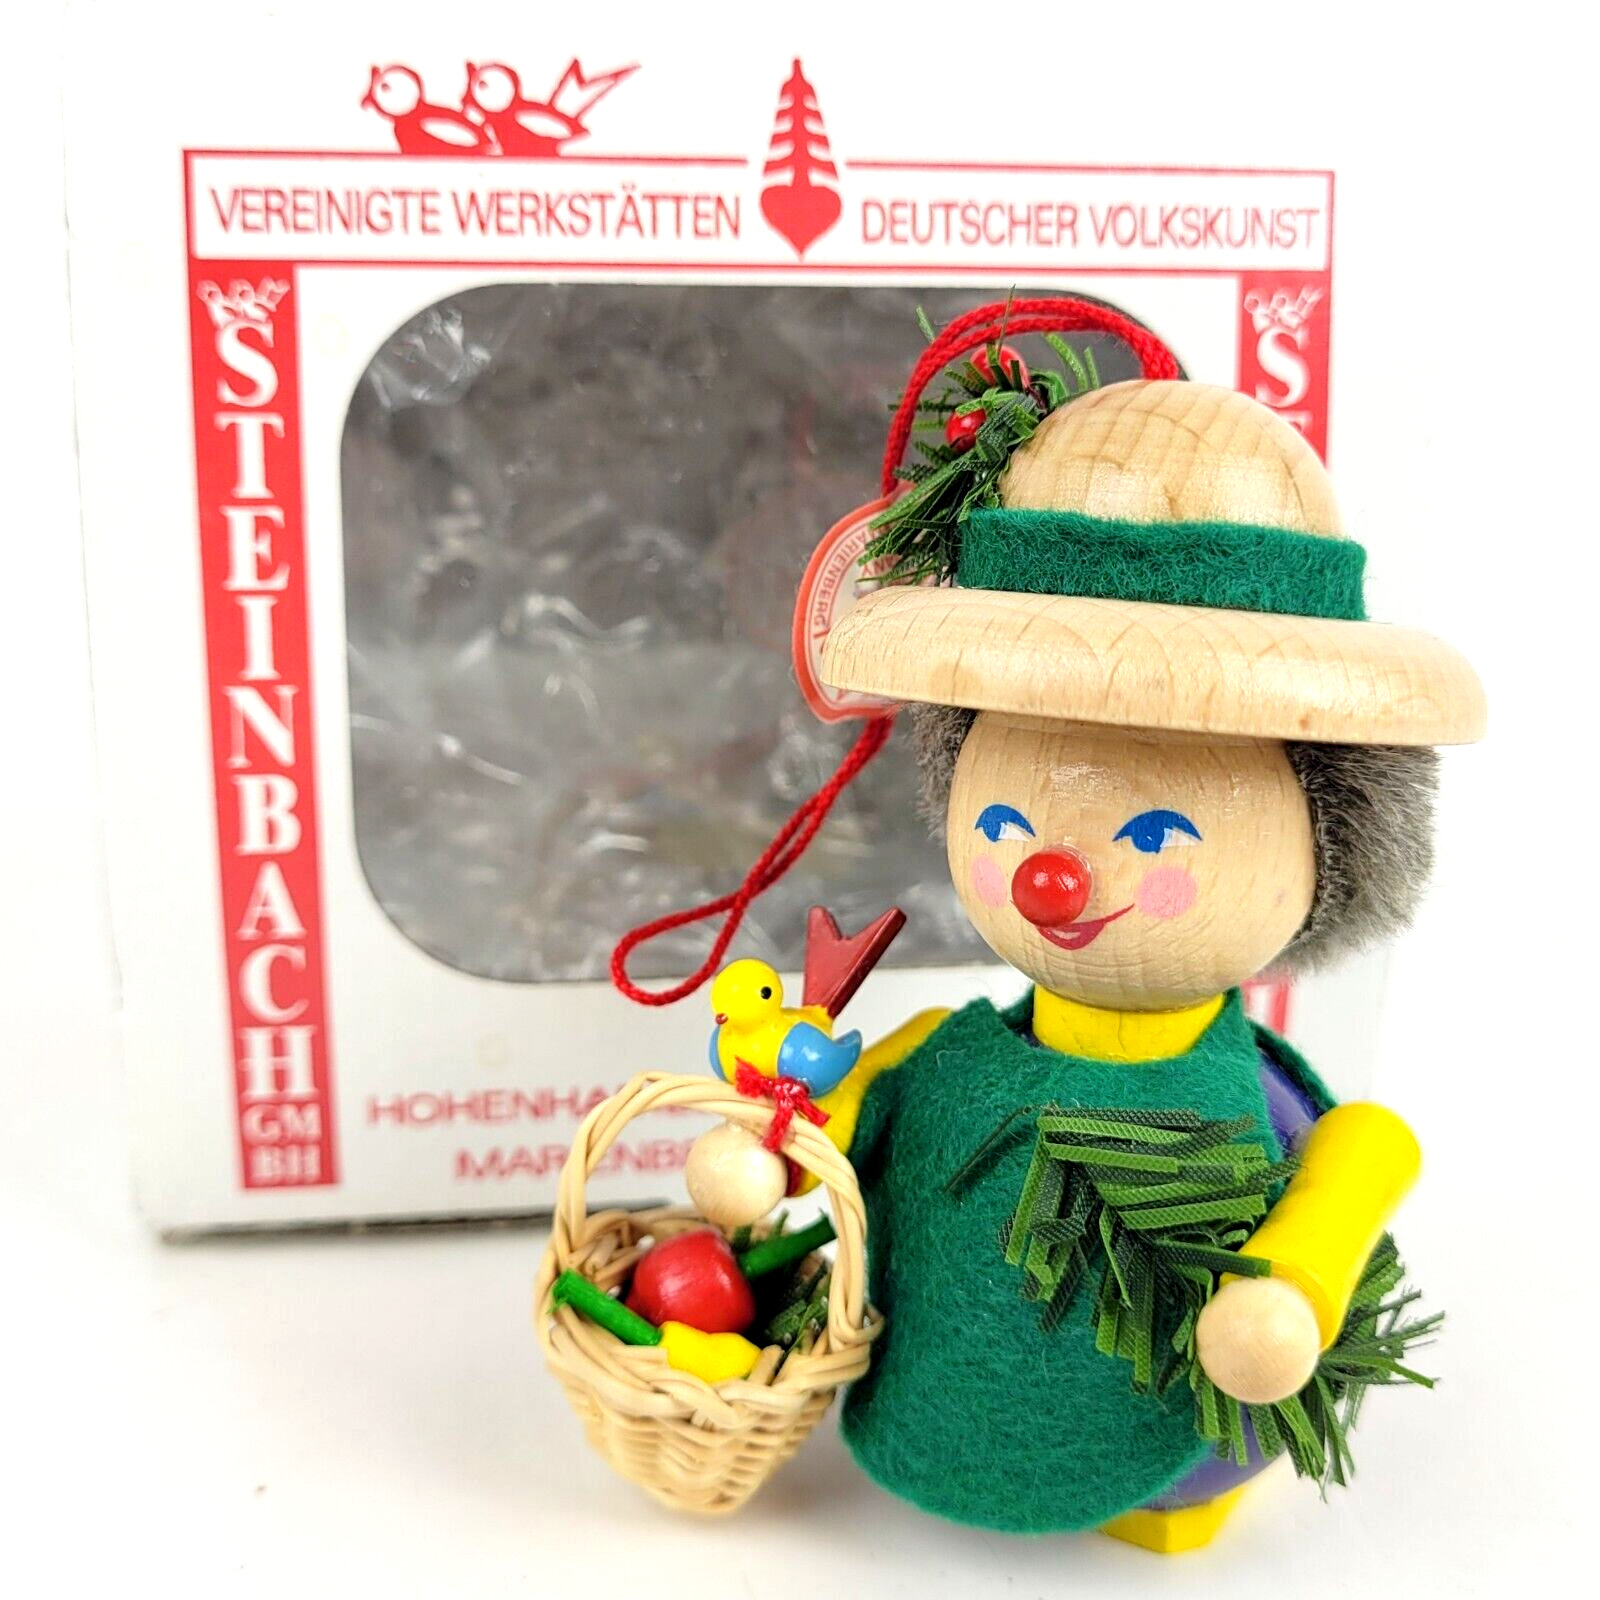 Vintage Steinbach Germany 3” Wooden Gardener Basket Christmas Ornament Boxed New